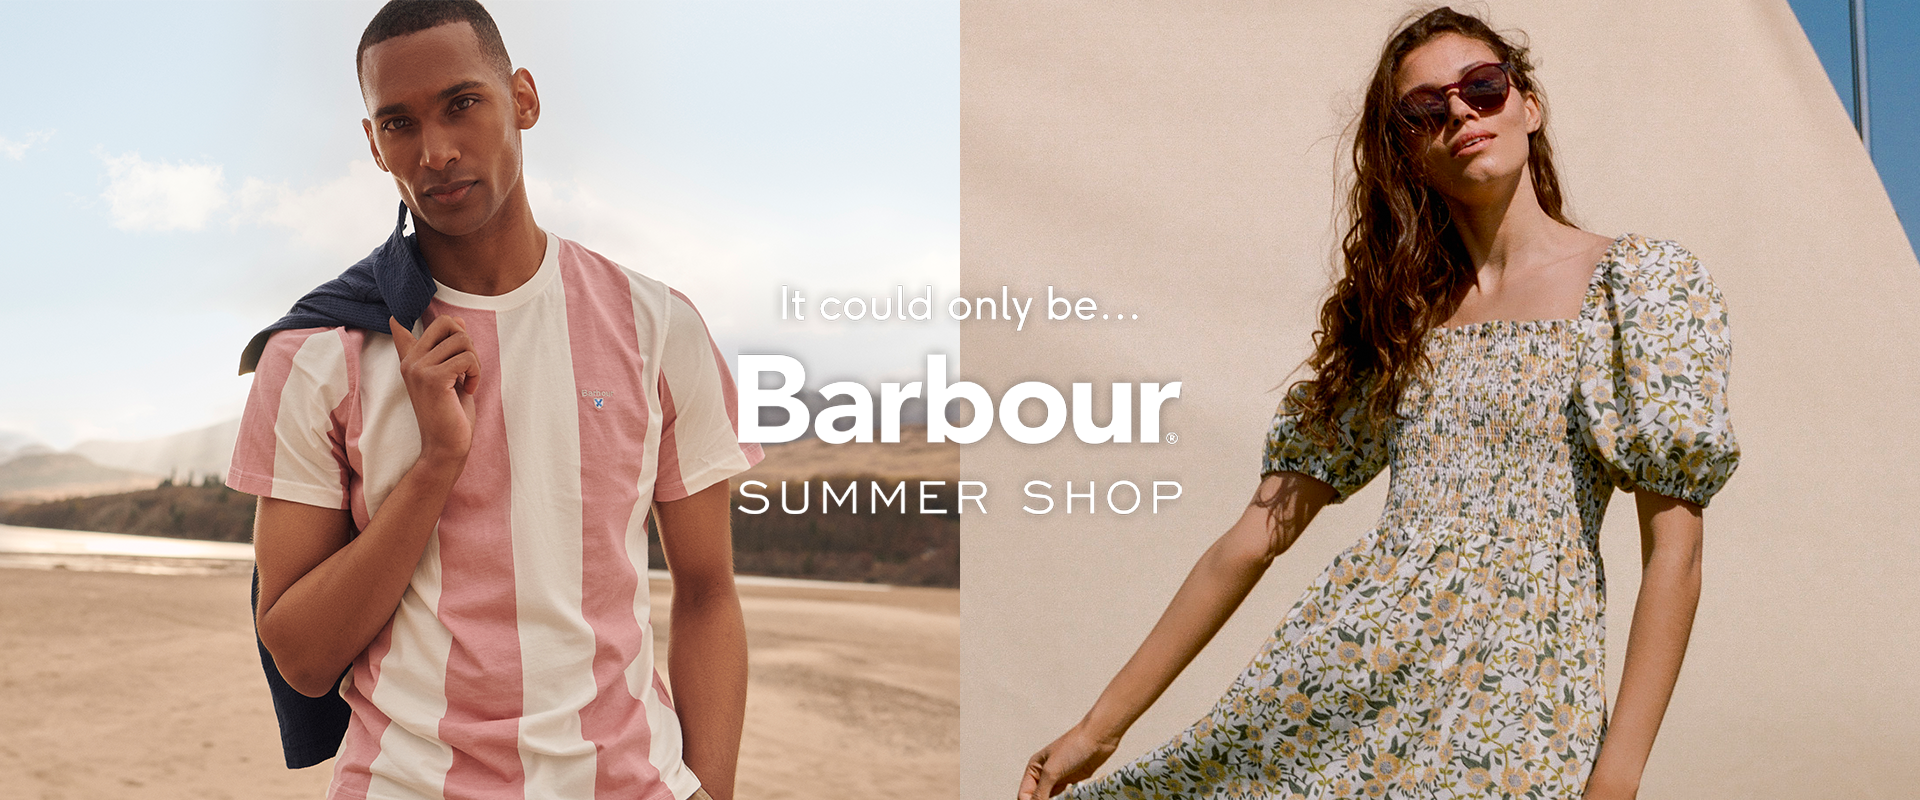 It could only be...Barbour Summer Shop